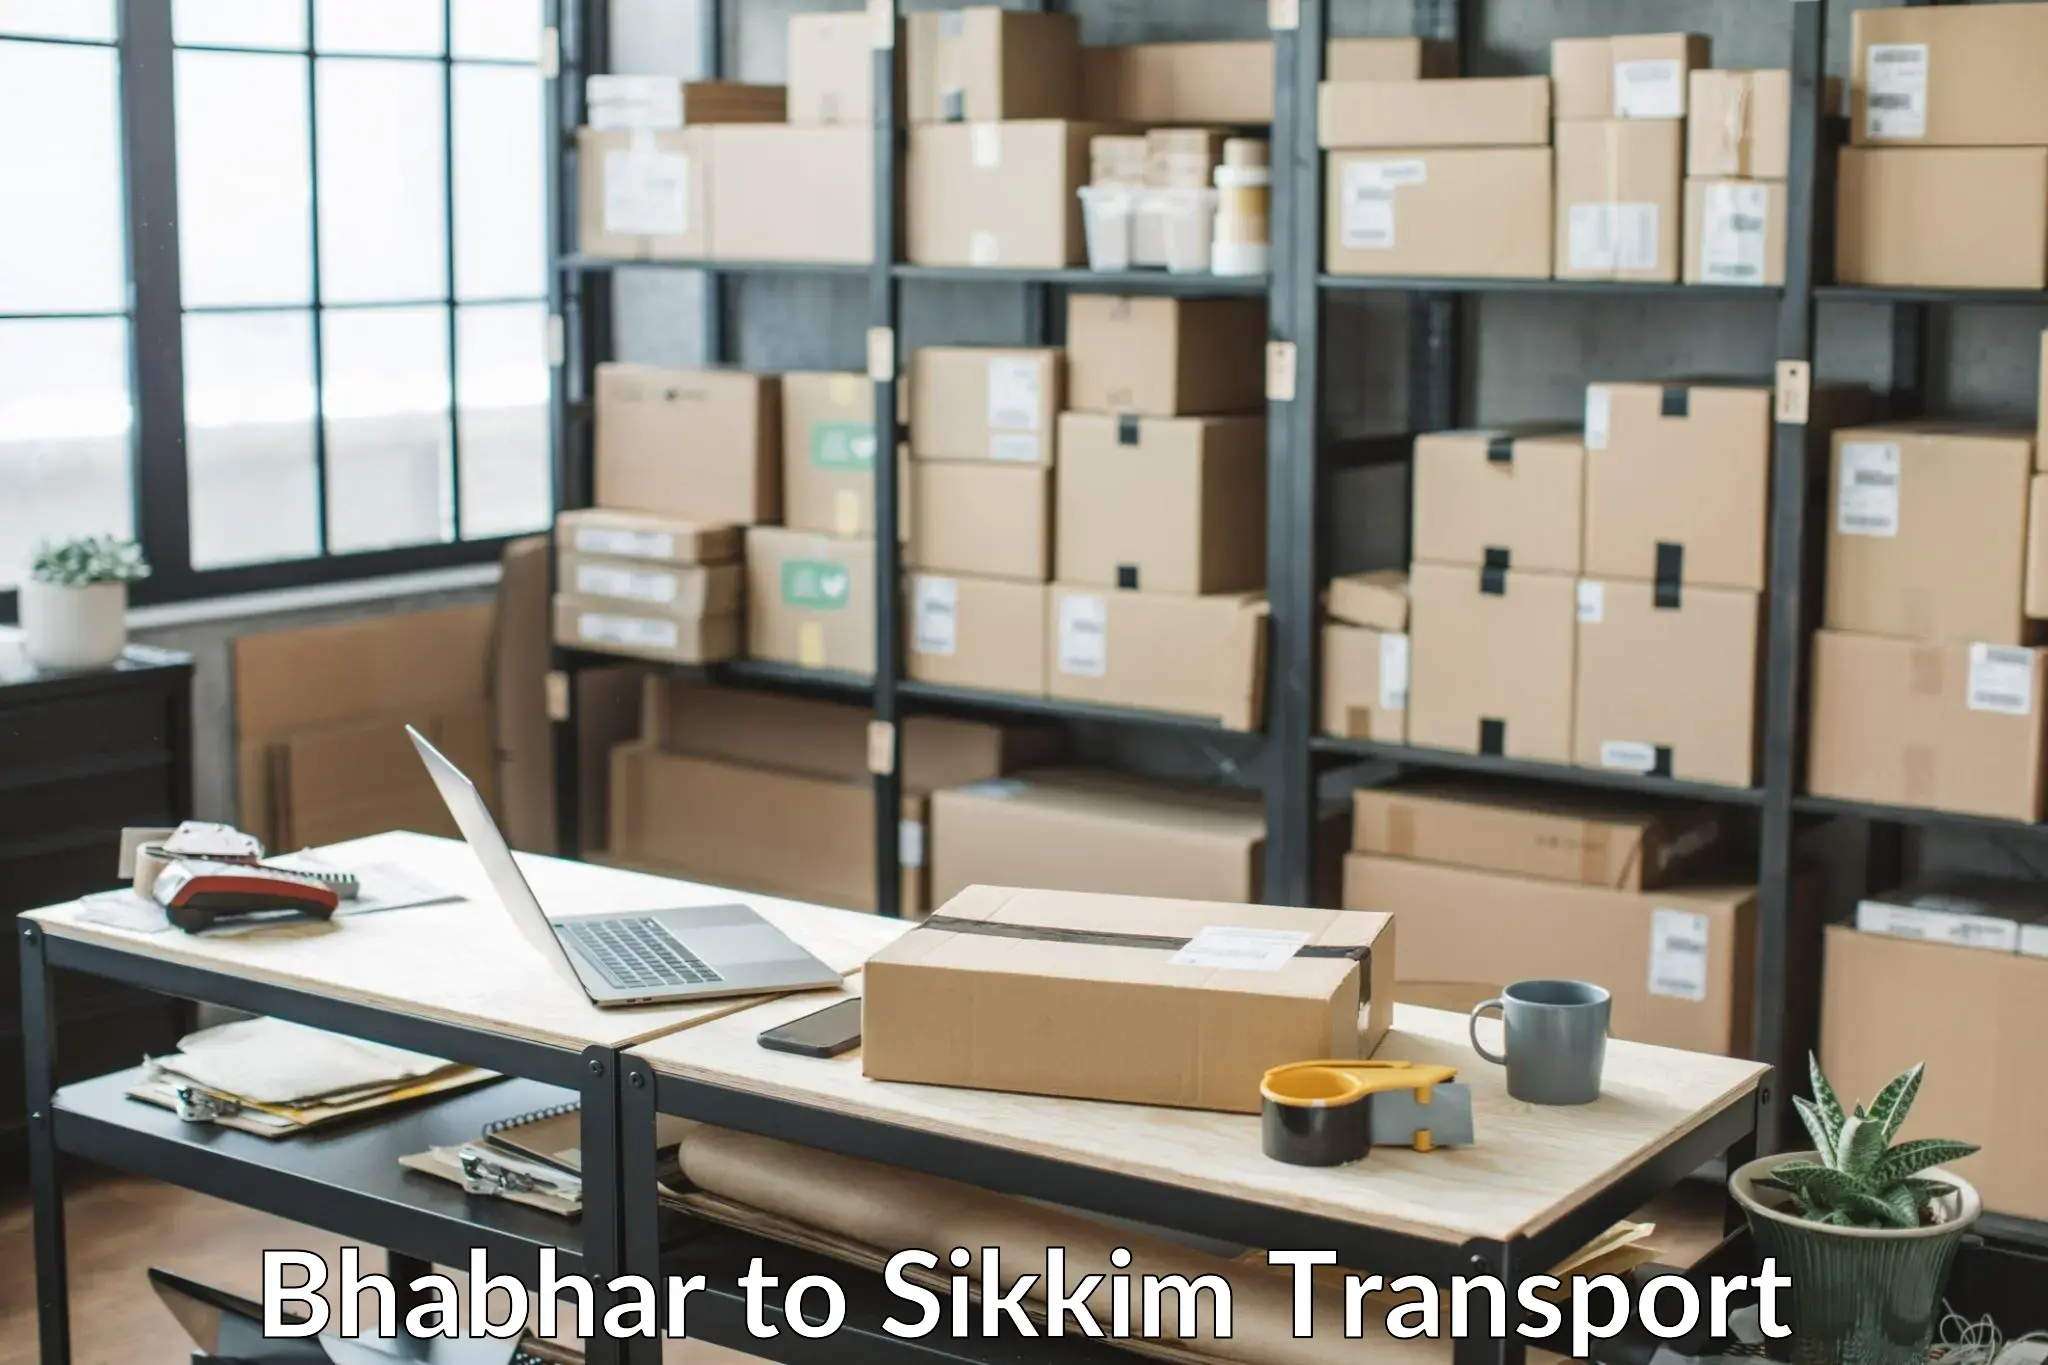 Daily transport service Bhabhar to South Sikkim